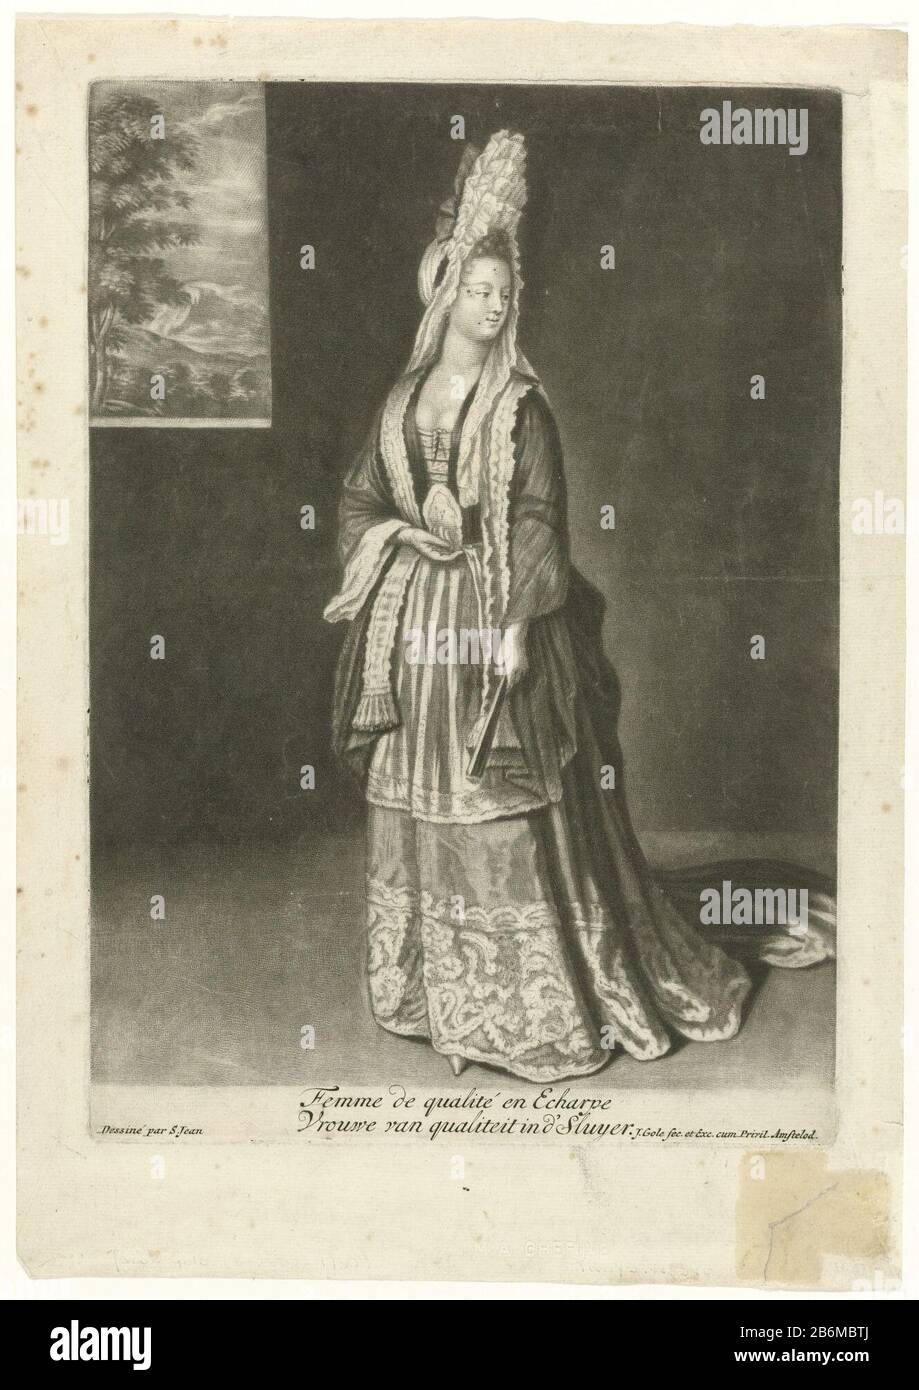 Leading woman wearing a manteau with drag and engageantes. She wears an  devant-the-gorge (thorax), transparent wide scarf around the shoulders,  skirt and ornamental apron. Fontangekapsel and palisade 'accessories:  earrings, thin scarf trimmed